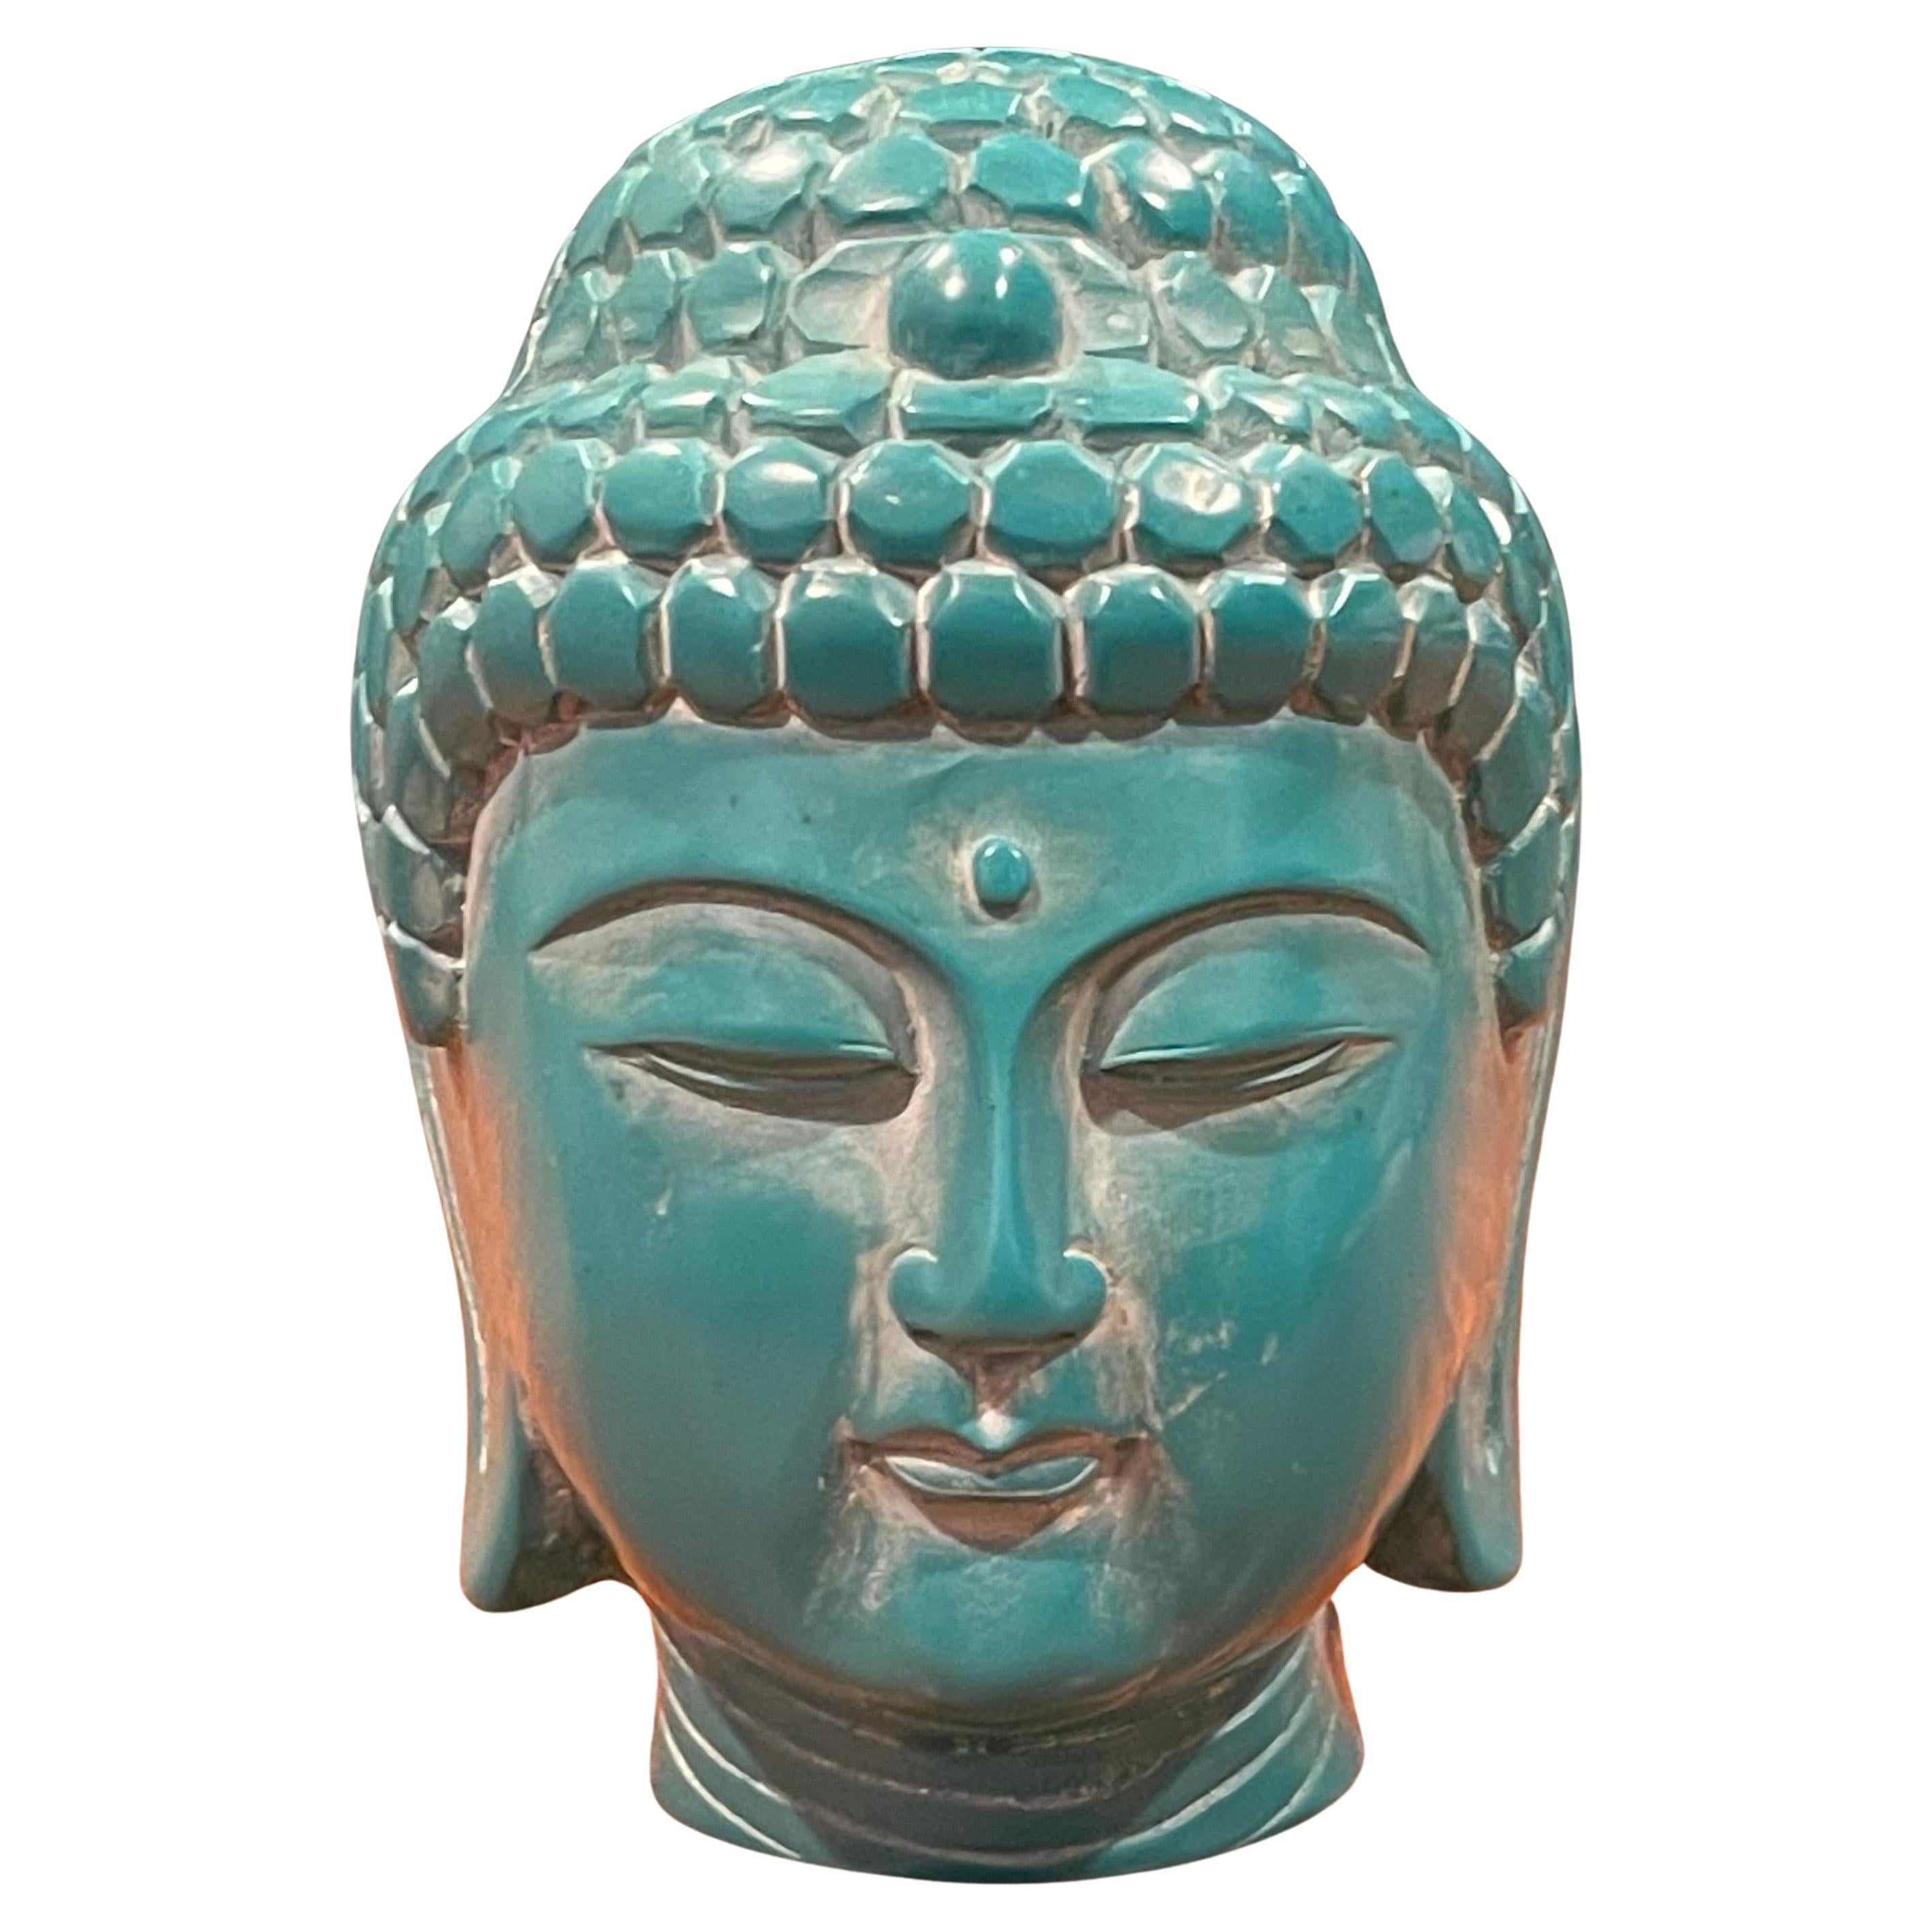 A very cool hand carved vintage Buddha head in teal bakelite on a rosewood stand, circa 1970s. The carved figure is a representation of Gautama Buddha, also known as the enlightened or awakened one. The piece is in very good vintage condition and